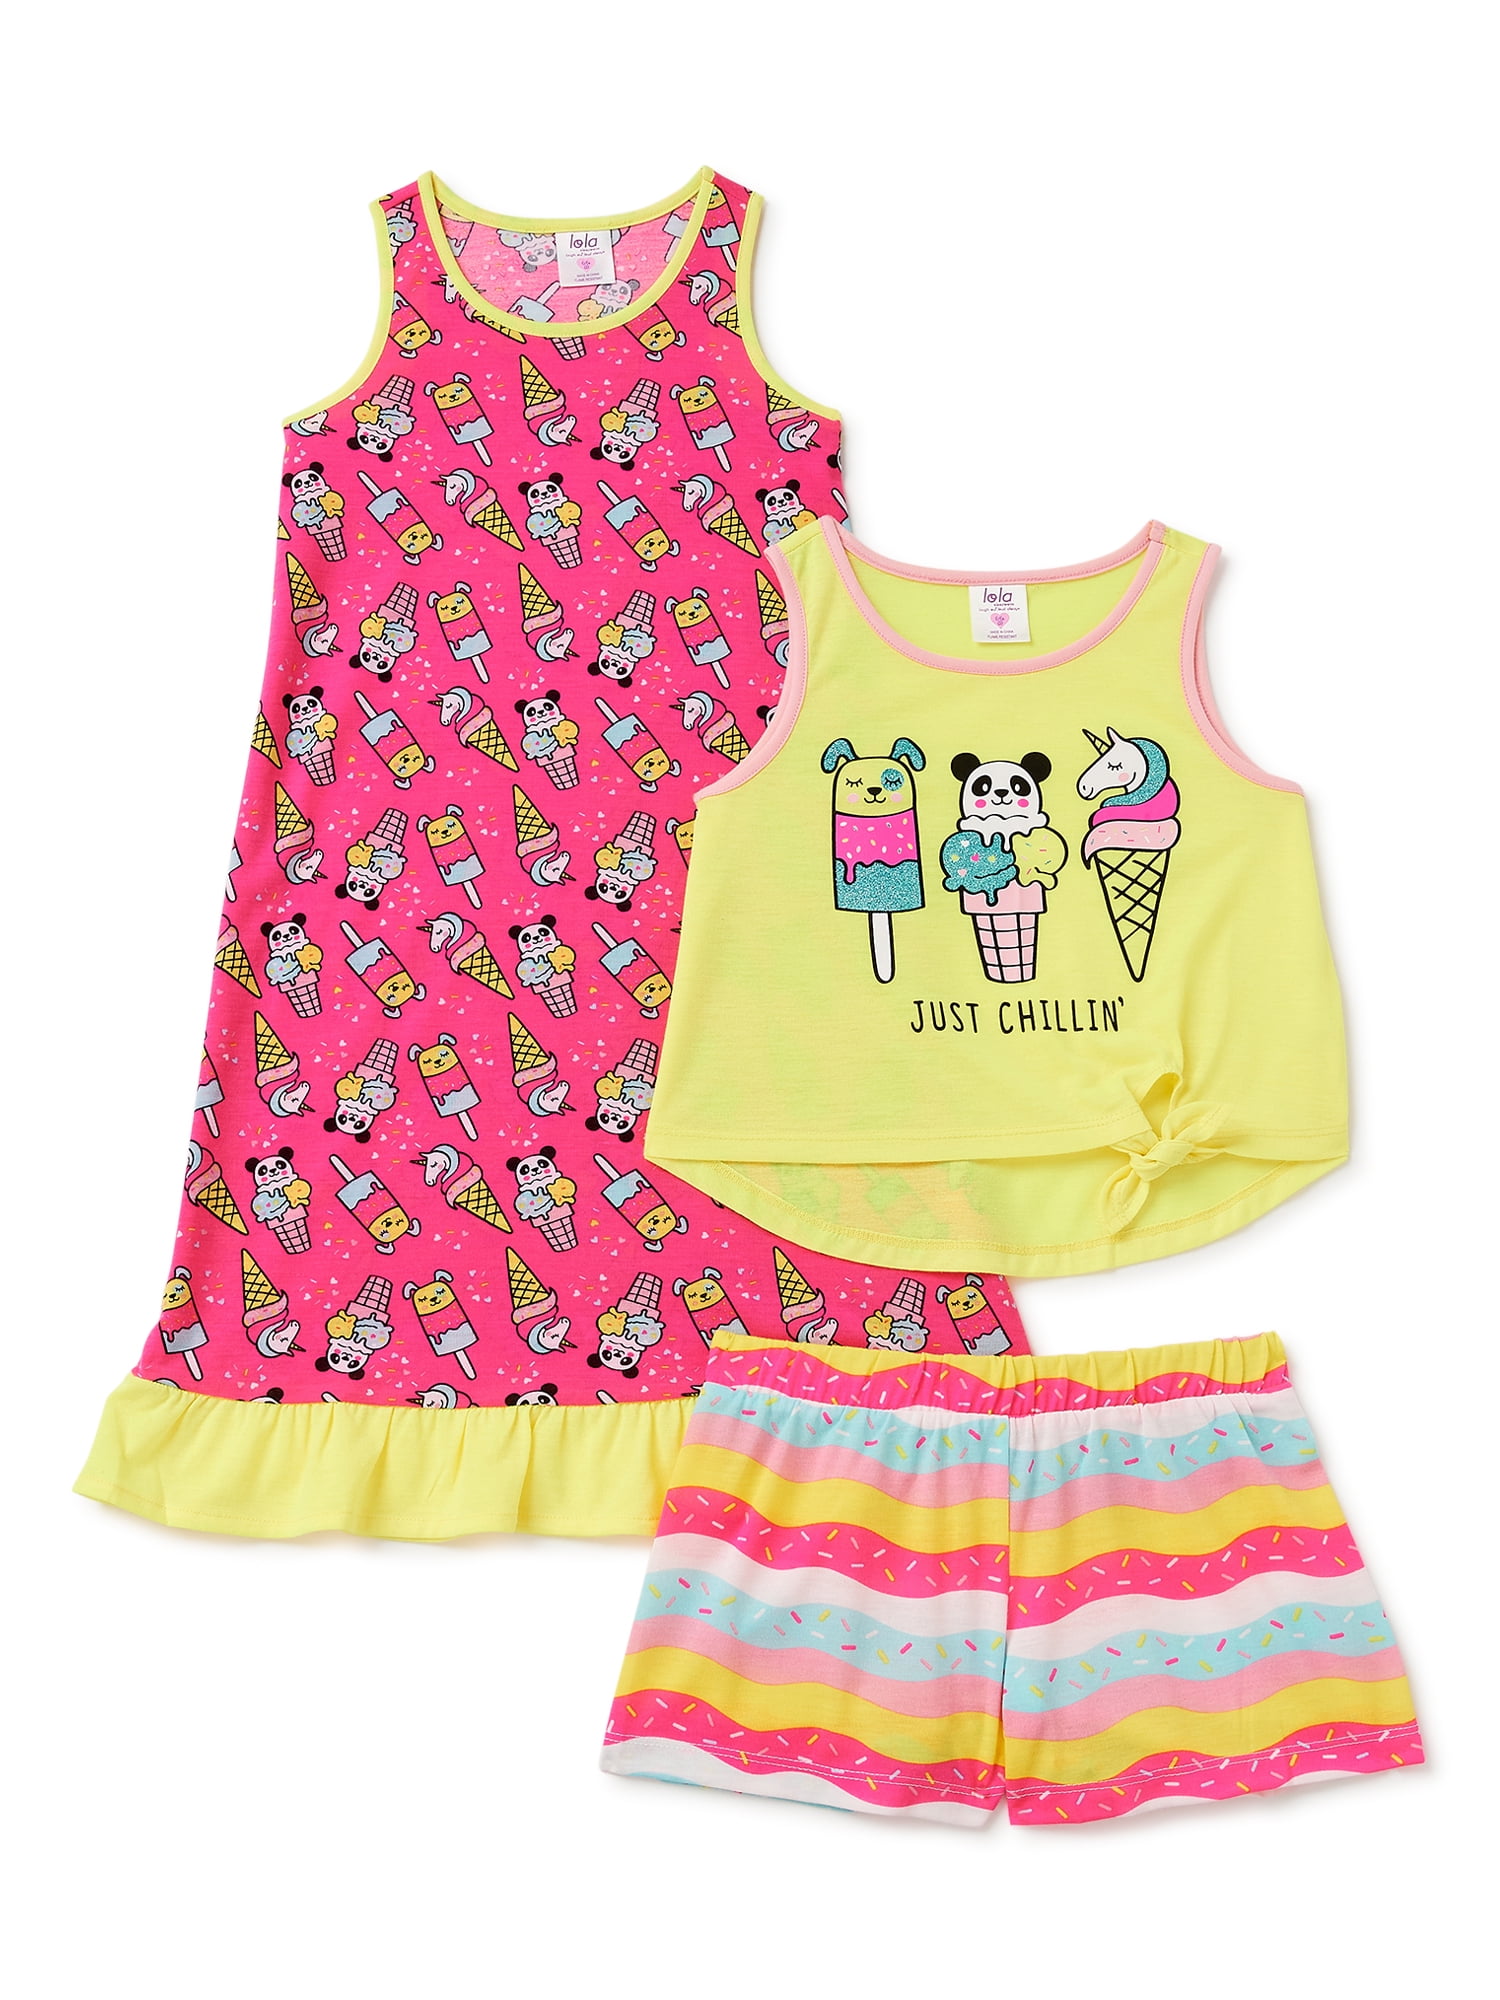 LOLA Girls Tank and Shorts with Nightgown, 3-Piece Pajama Set, Sizes 4 ...